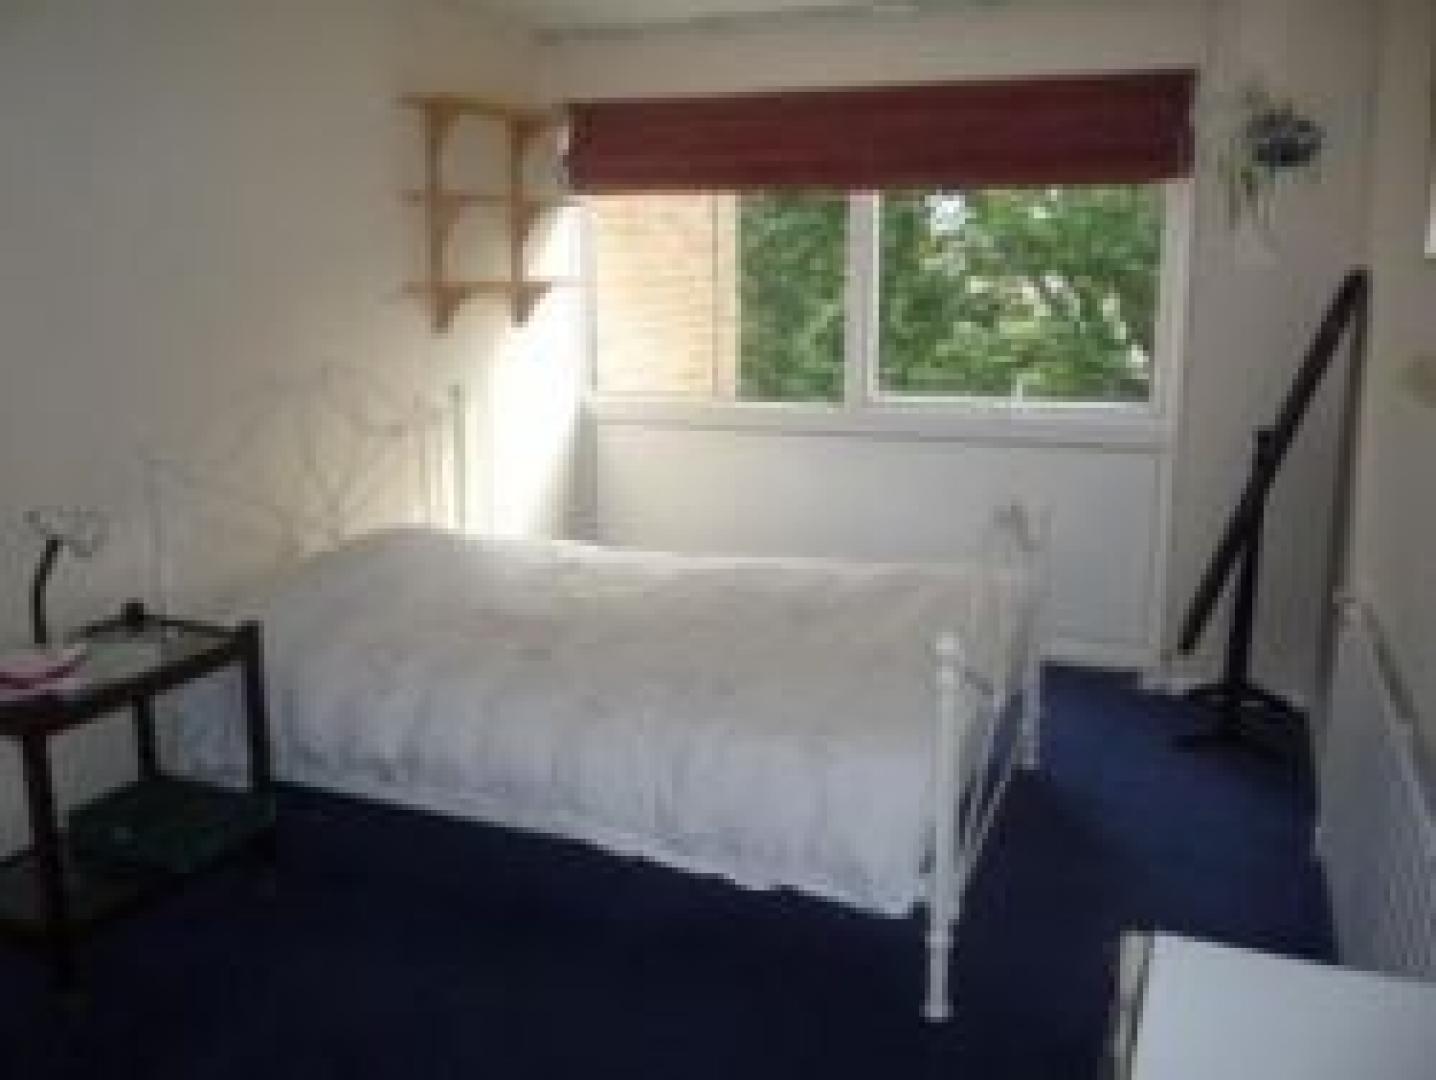 			INCLUSIVE OF COUNCIL TAX AND WATER RATES!, 2 Bedroom, 1 bath, 1 reception Apartment			 Fortis Green, EAST FINCHLEY